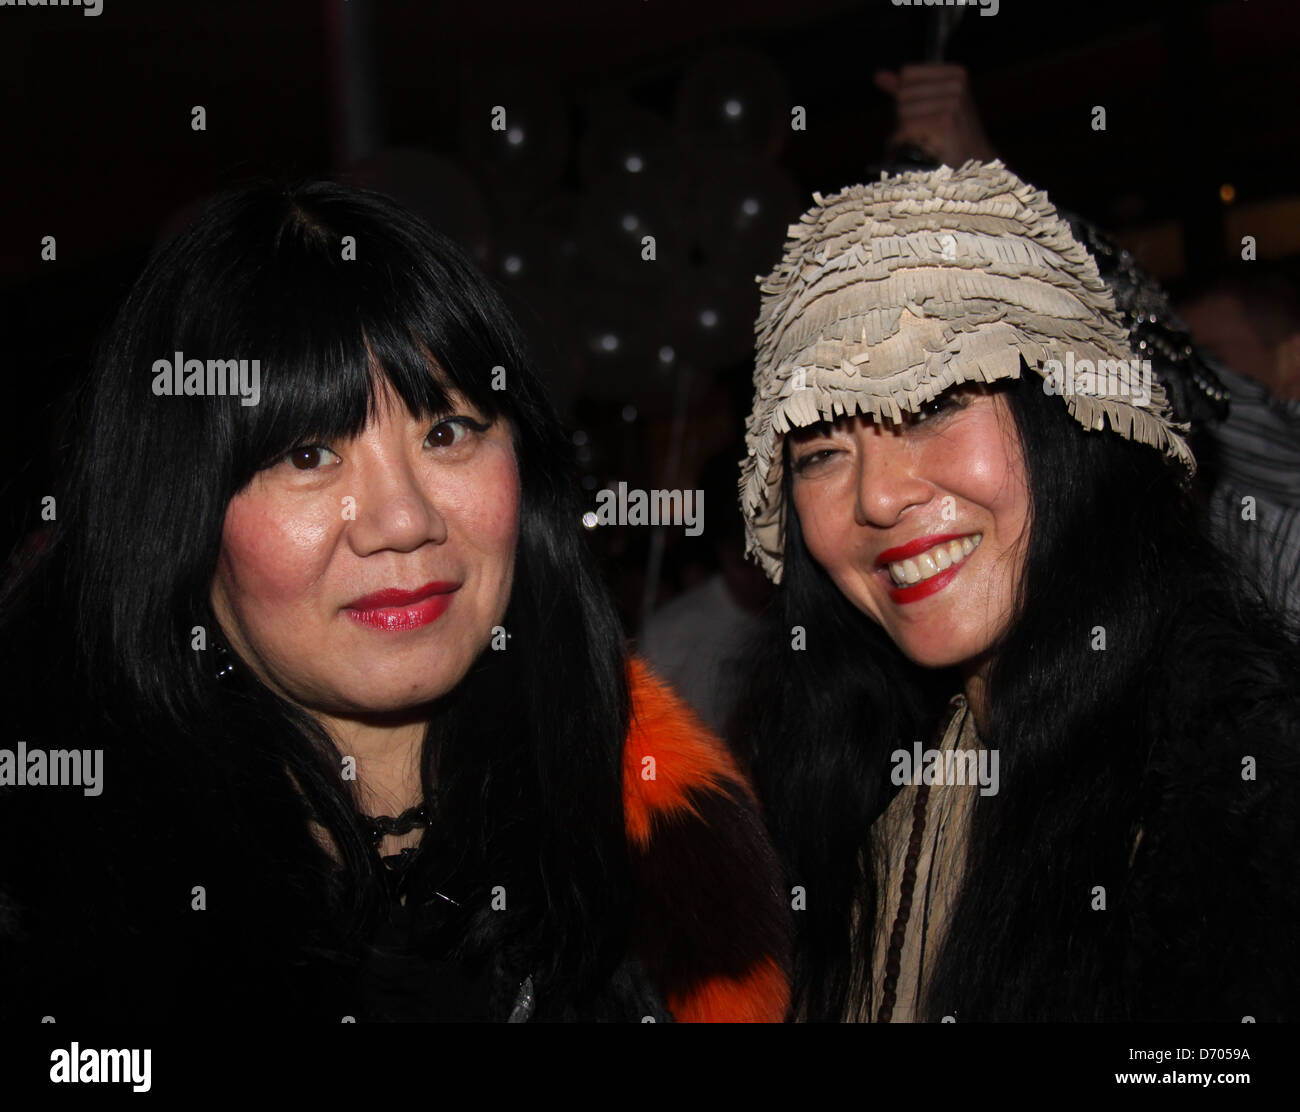 Anna Sui and Gemma Kahng The Roger Padhilla birthday party at Yotel New York City, USA - 03.03.12 Stock Photo